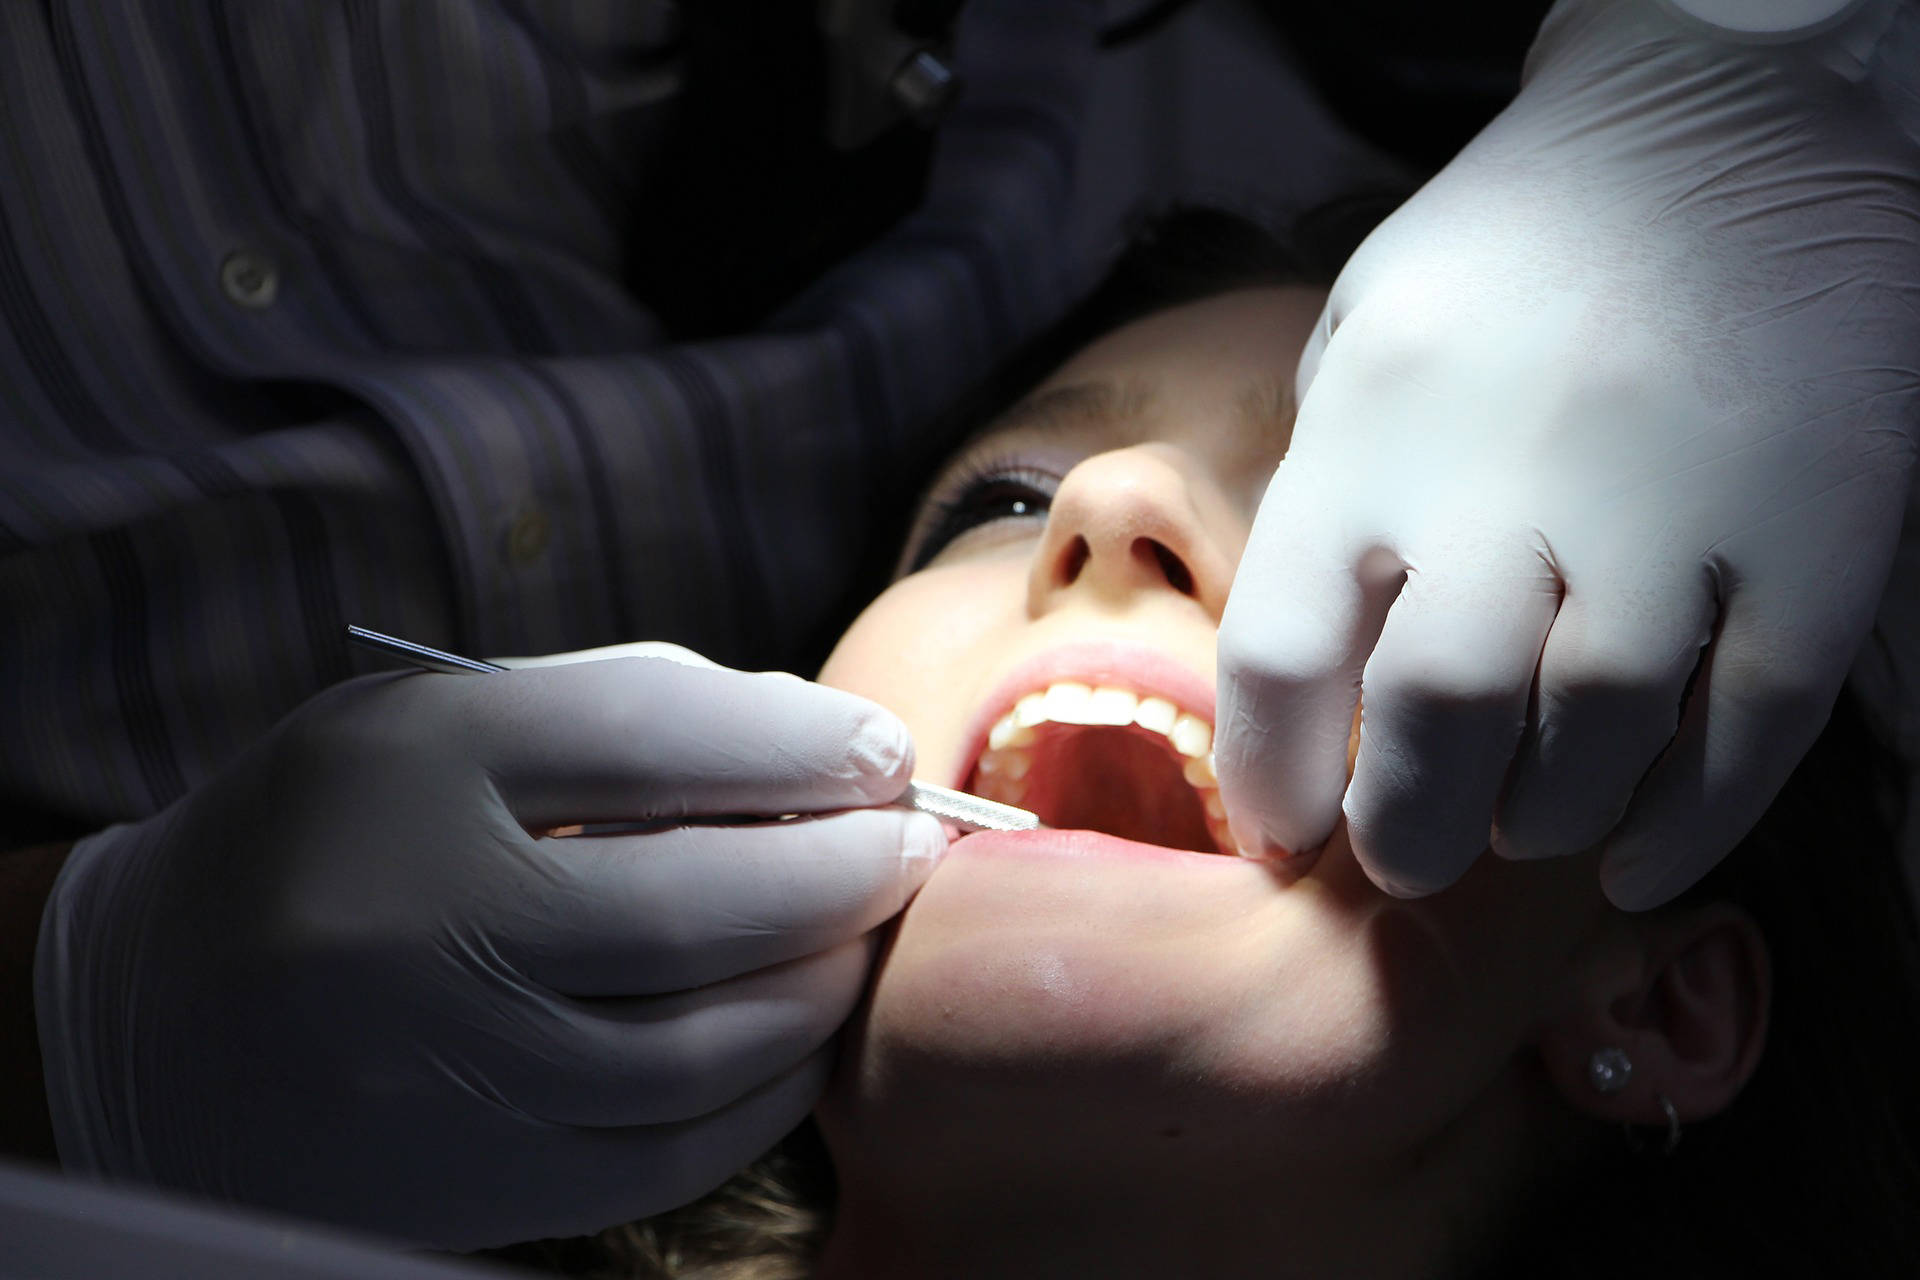 Free tooth extraction clinic on Jan. 14